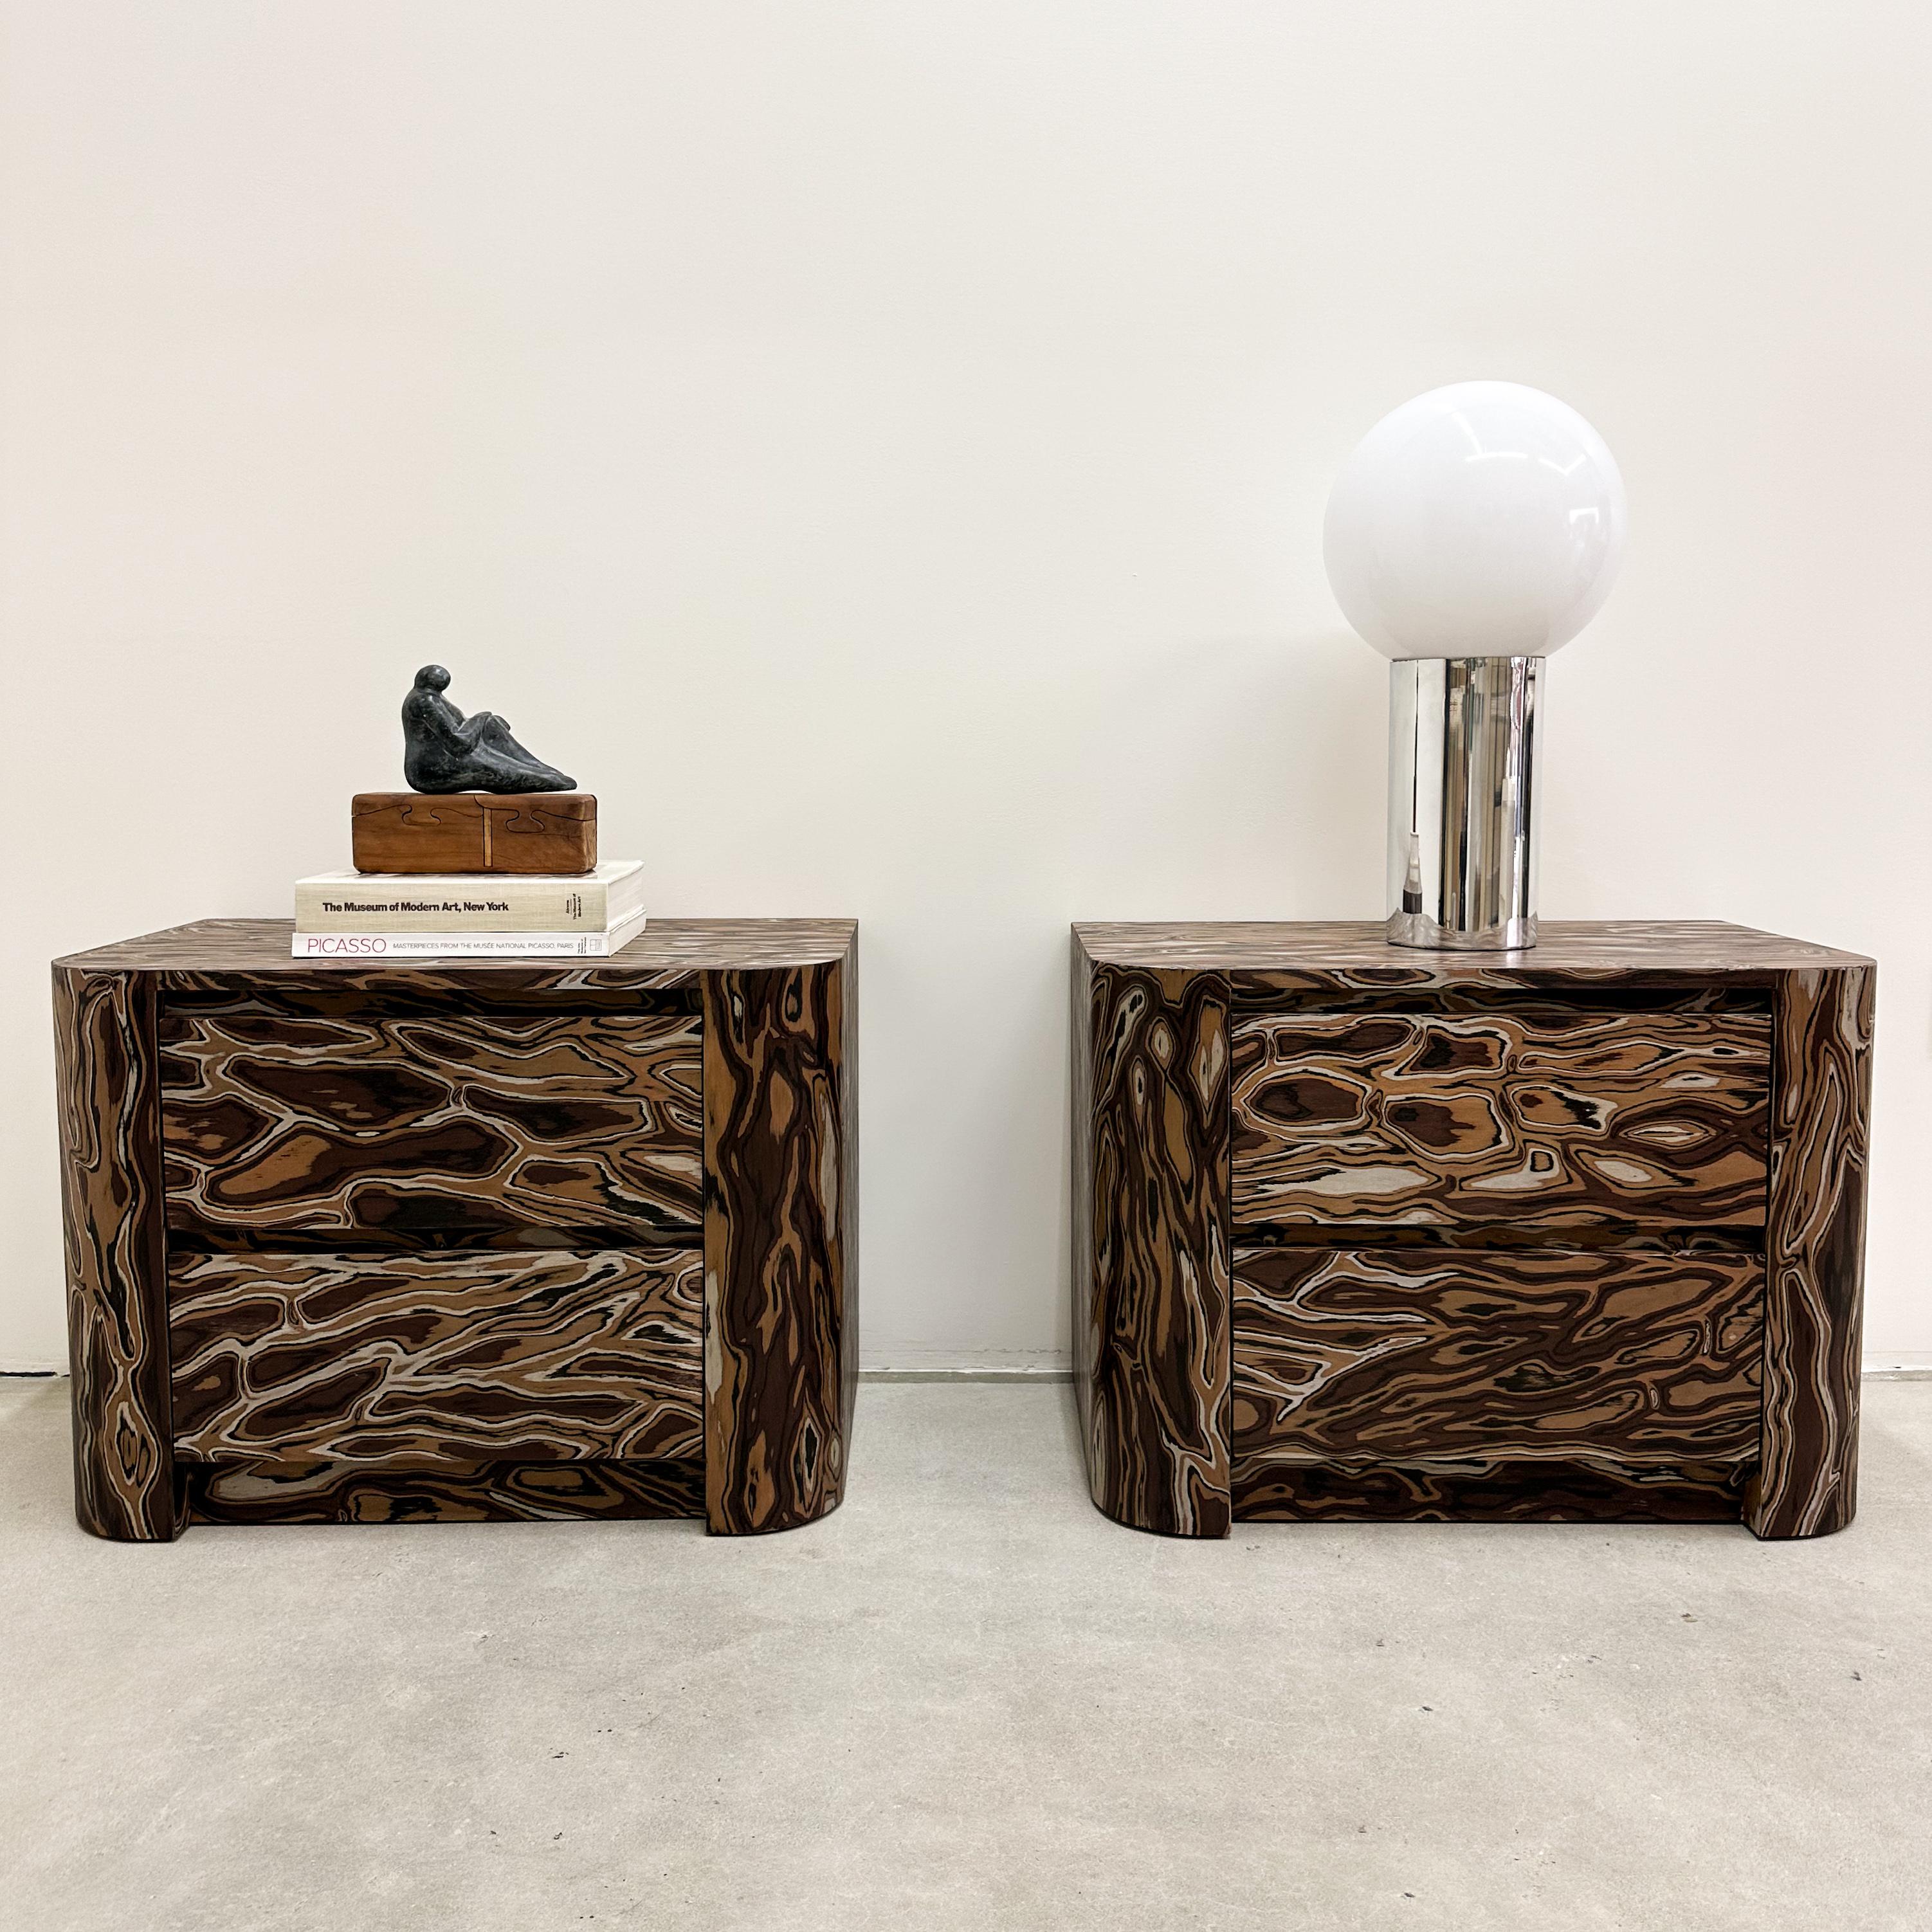 Vintage Pair of Nightstands Featuring Kengo Kuma Veneer.

The vintage nightstands have been meticulously re-veneered, featuring the original design by Kengo Kuma, a renowned architect recognized for his adept use of natural materials to craft